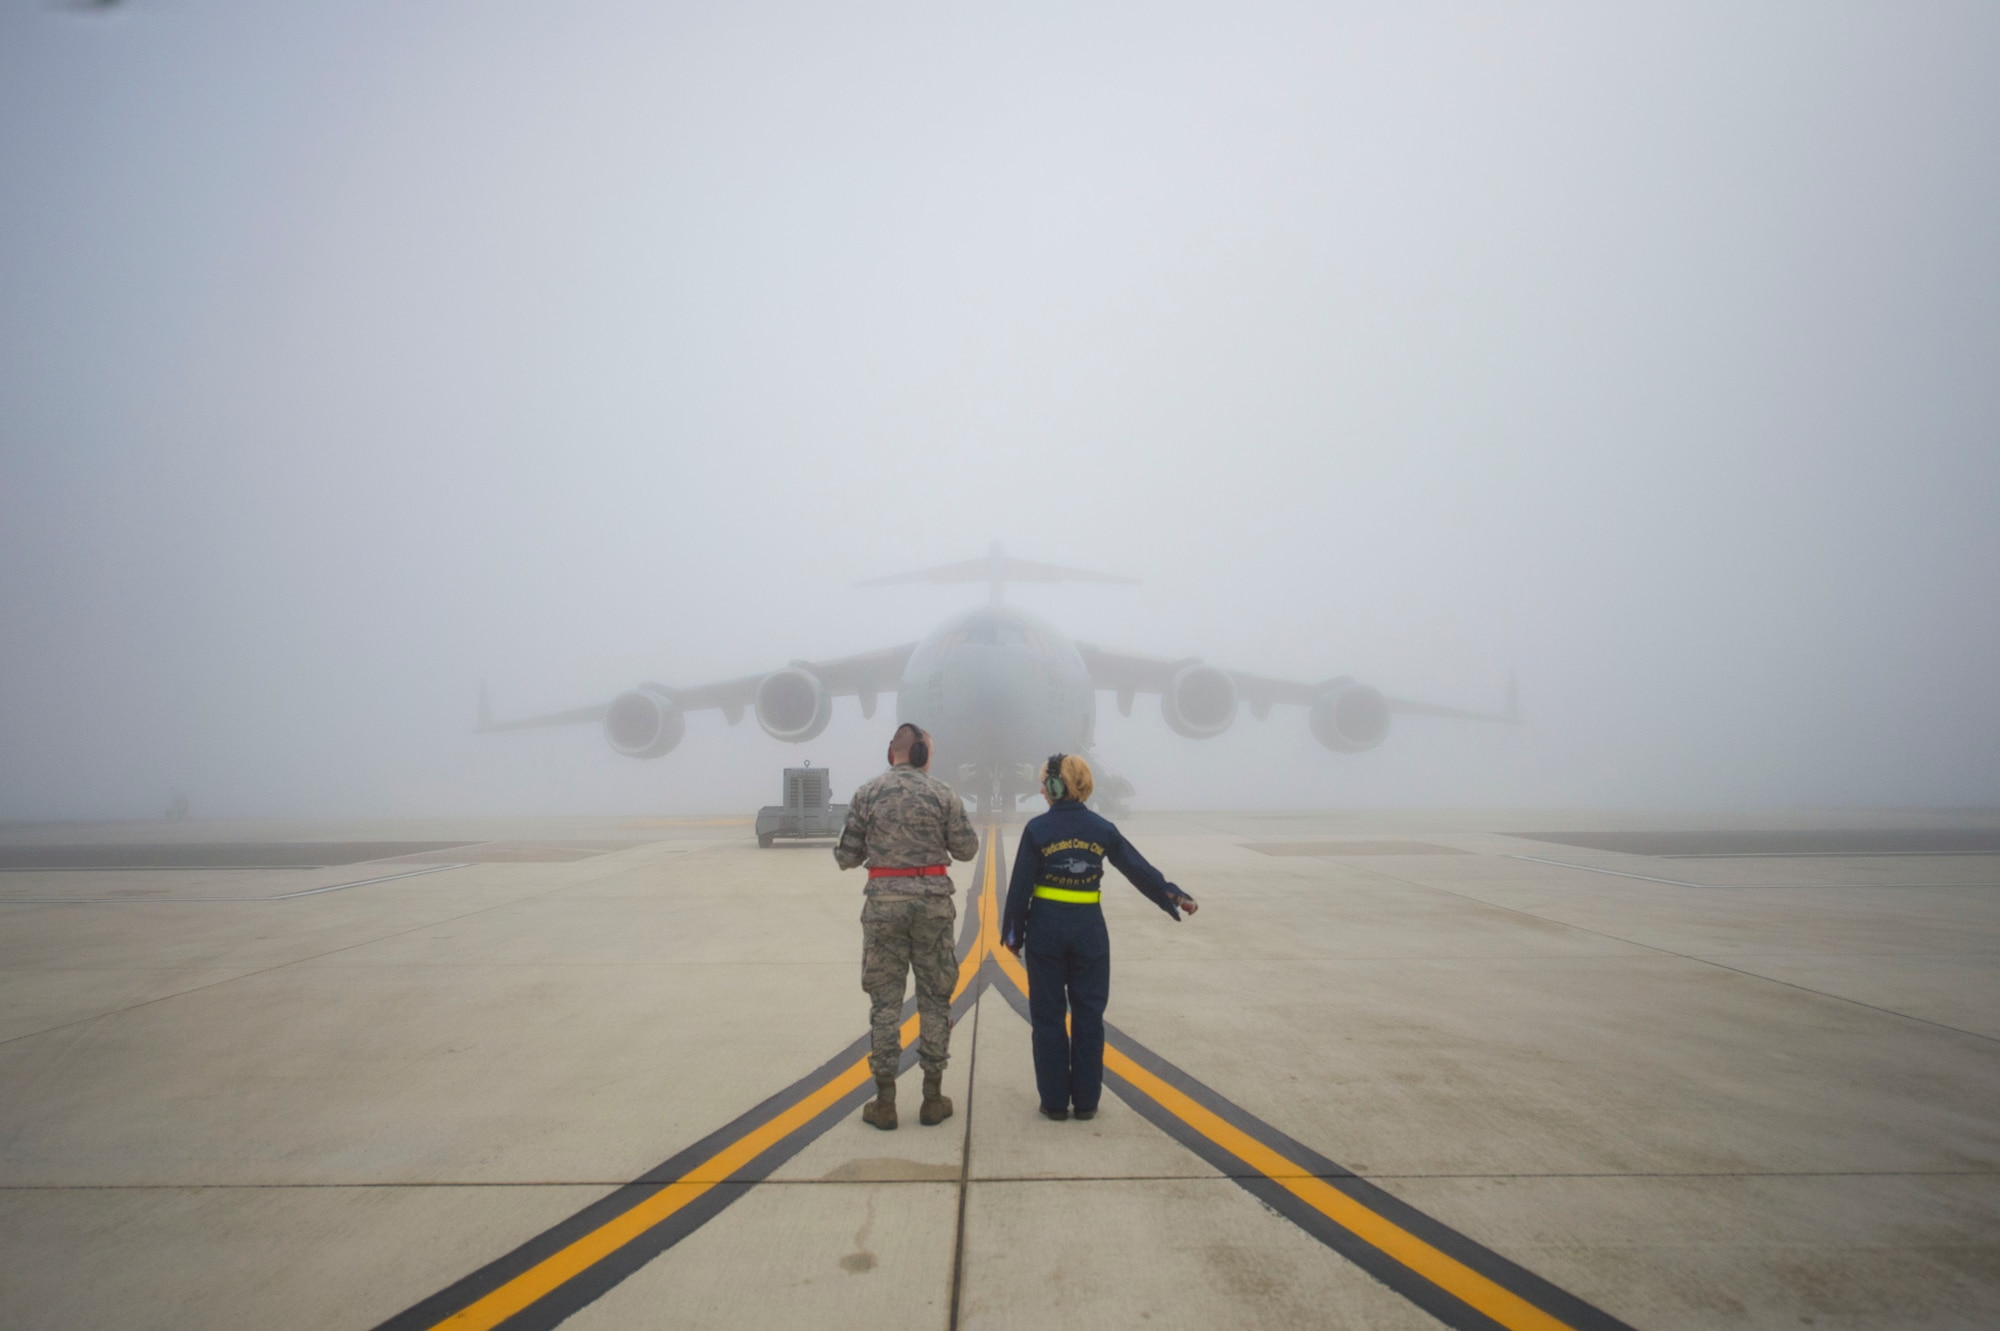 Tech. Sgt. Christine King (right), 512th Airlift Wing, shows Airman 1st Class Anthony Mahon, 436th Airlift Wing, the different signaling procedures to safely marshal a C-17 Globemaster III aircraft on Dover Air Force Base, Del., March 17, 2016. King regularly trains younger and less experienced active-duty and reserve Airmen in the C-17 maintenance career field. (U.S. Air Force photo/ Capt. Bernie Kale)